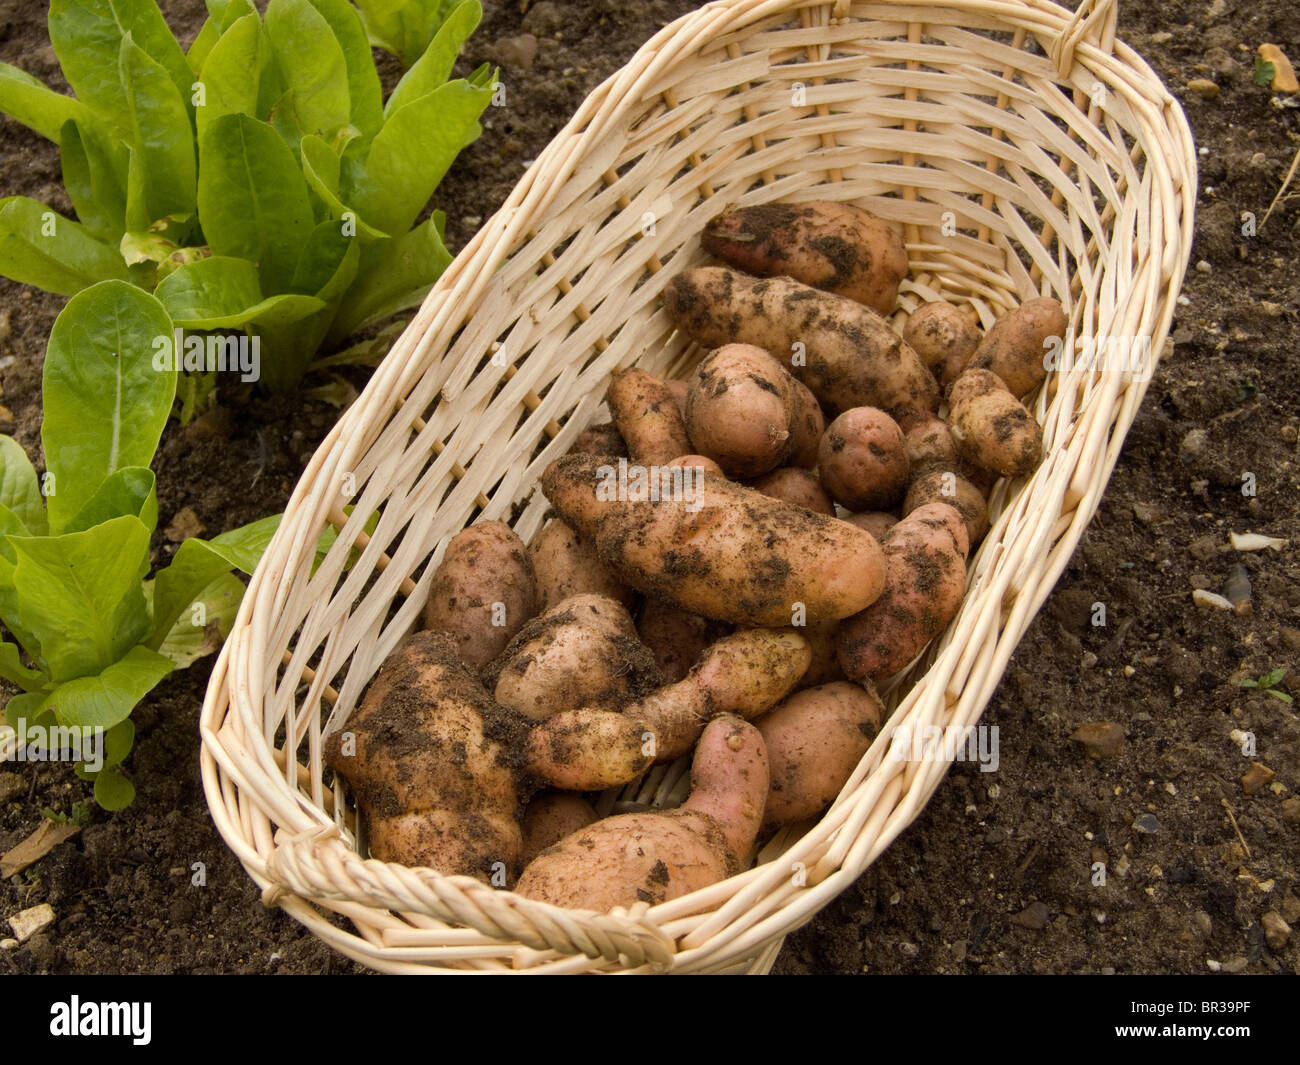 Home grown Pink Fir Apple potatoes  just after being dug and displayed in a small wicker basket Stock Photo